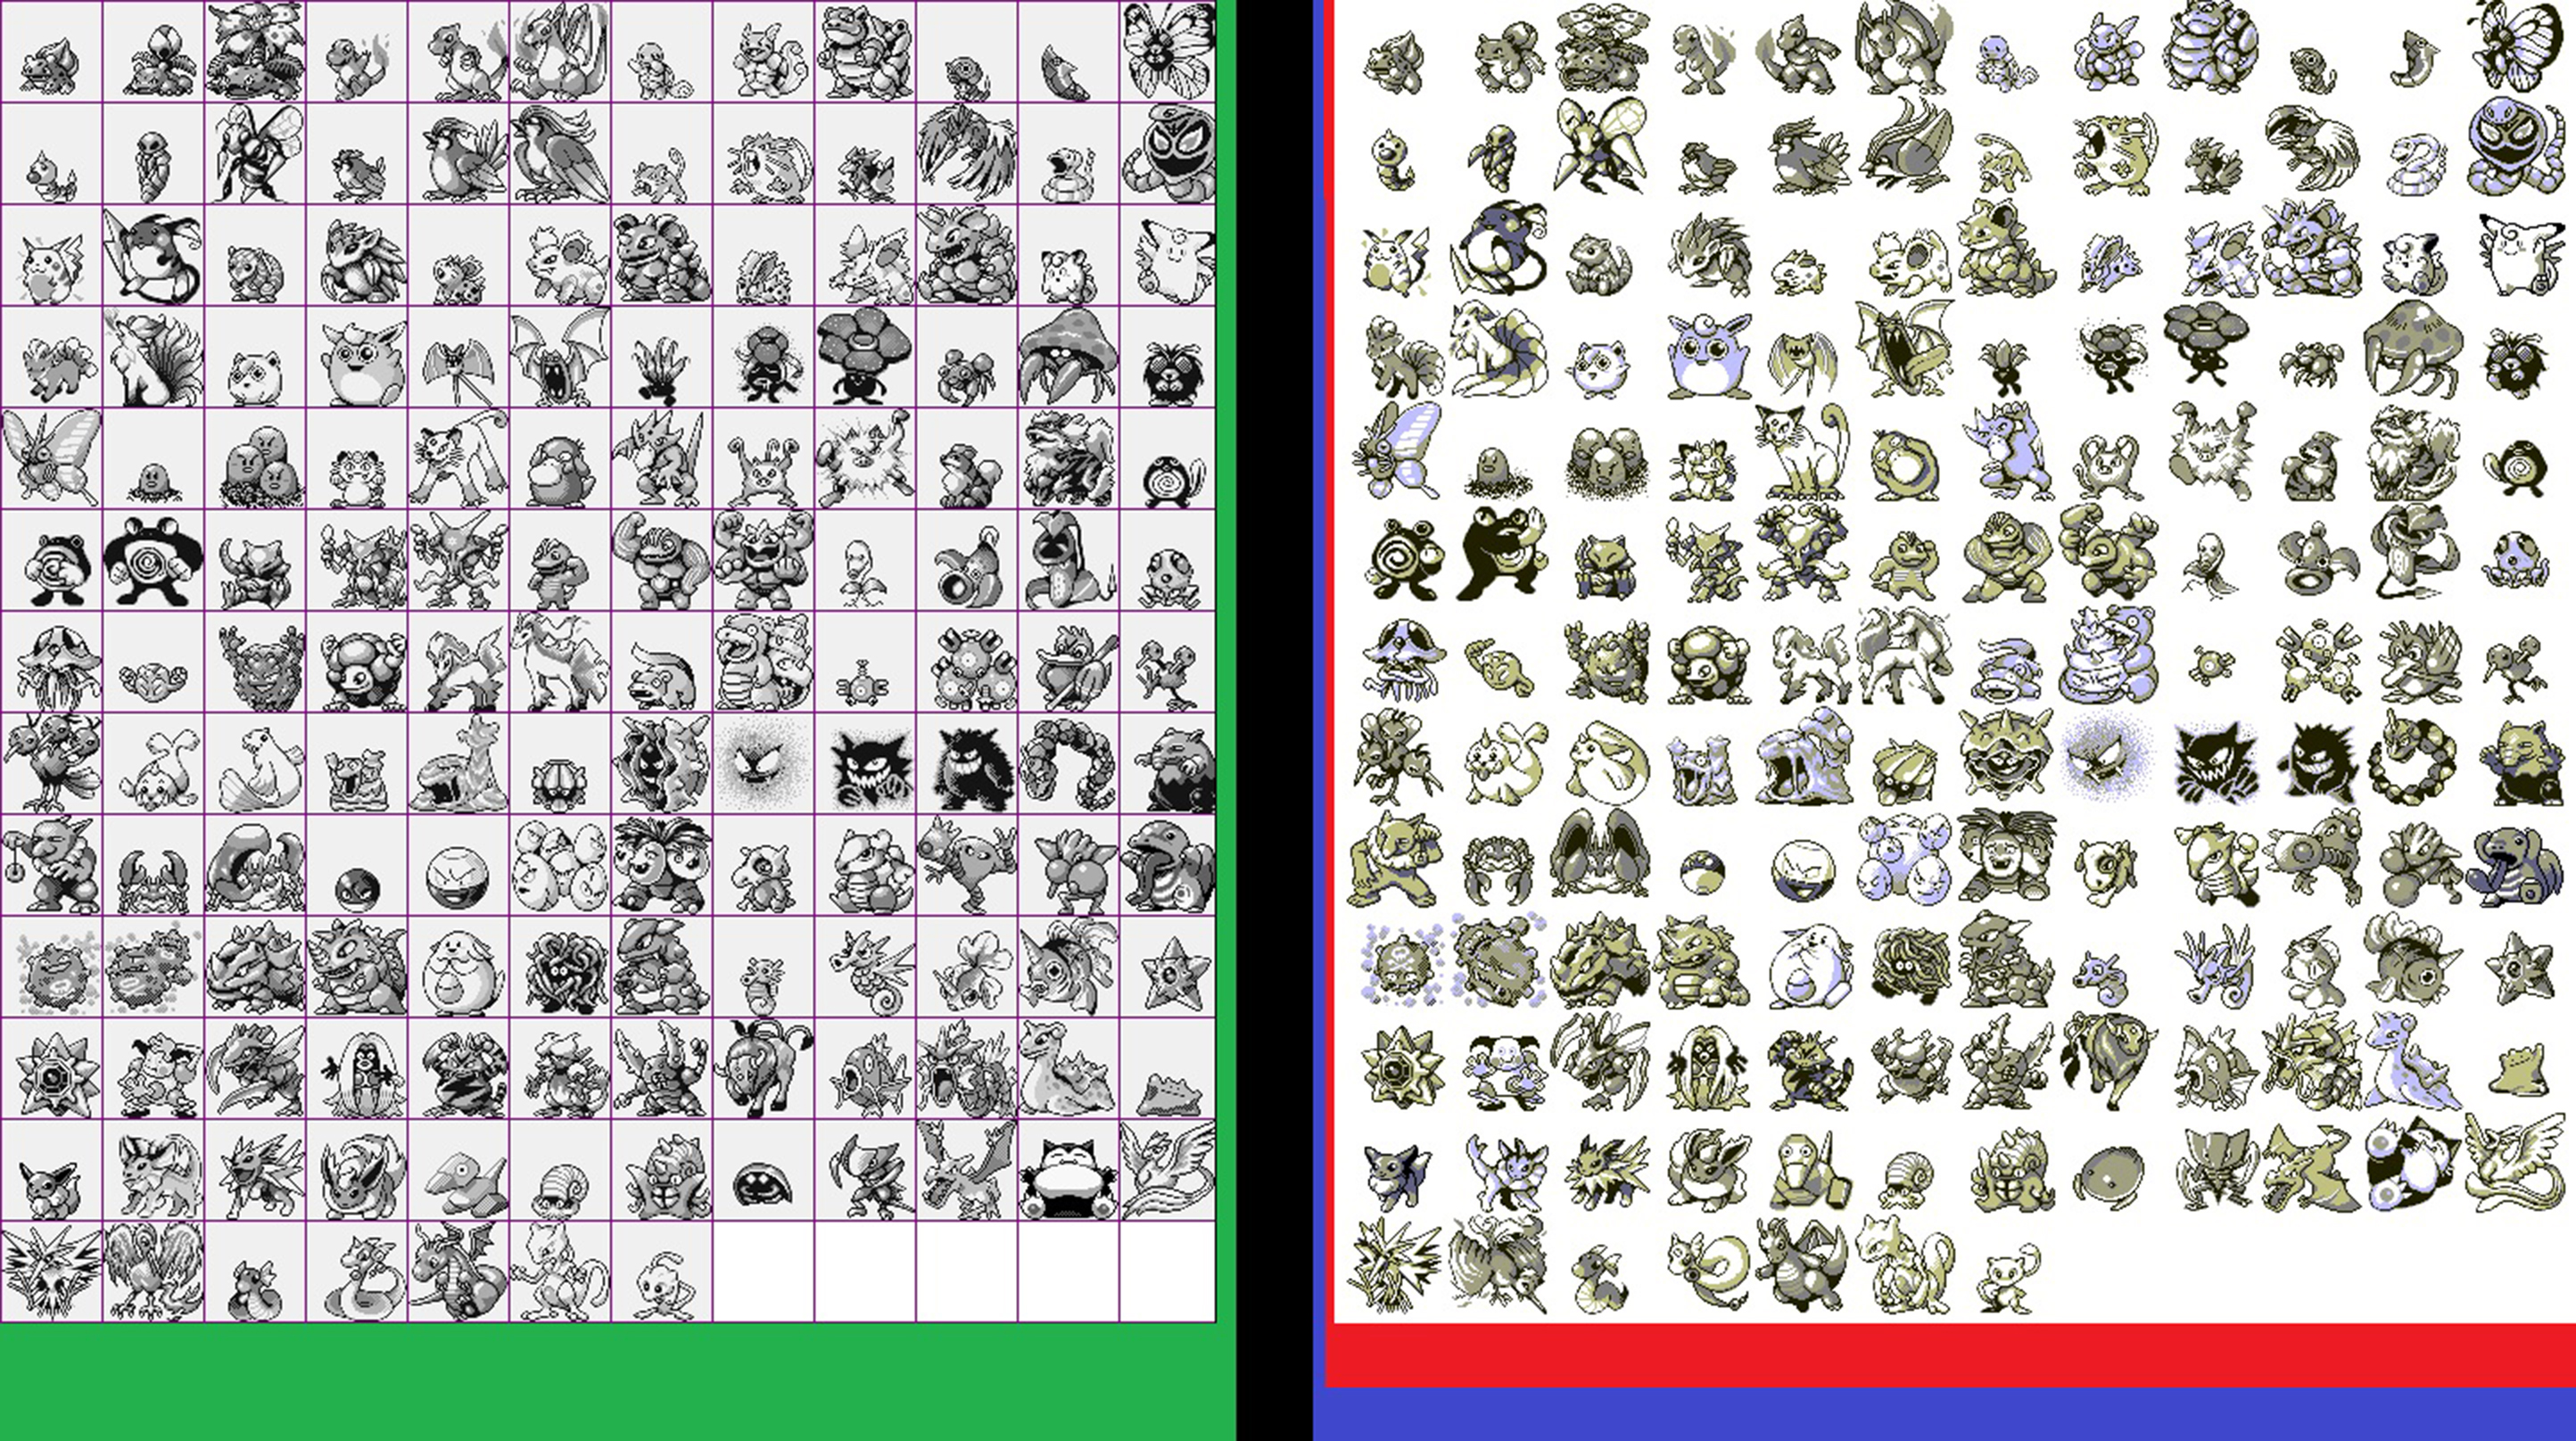 pokemon red and green and blue